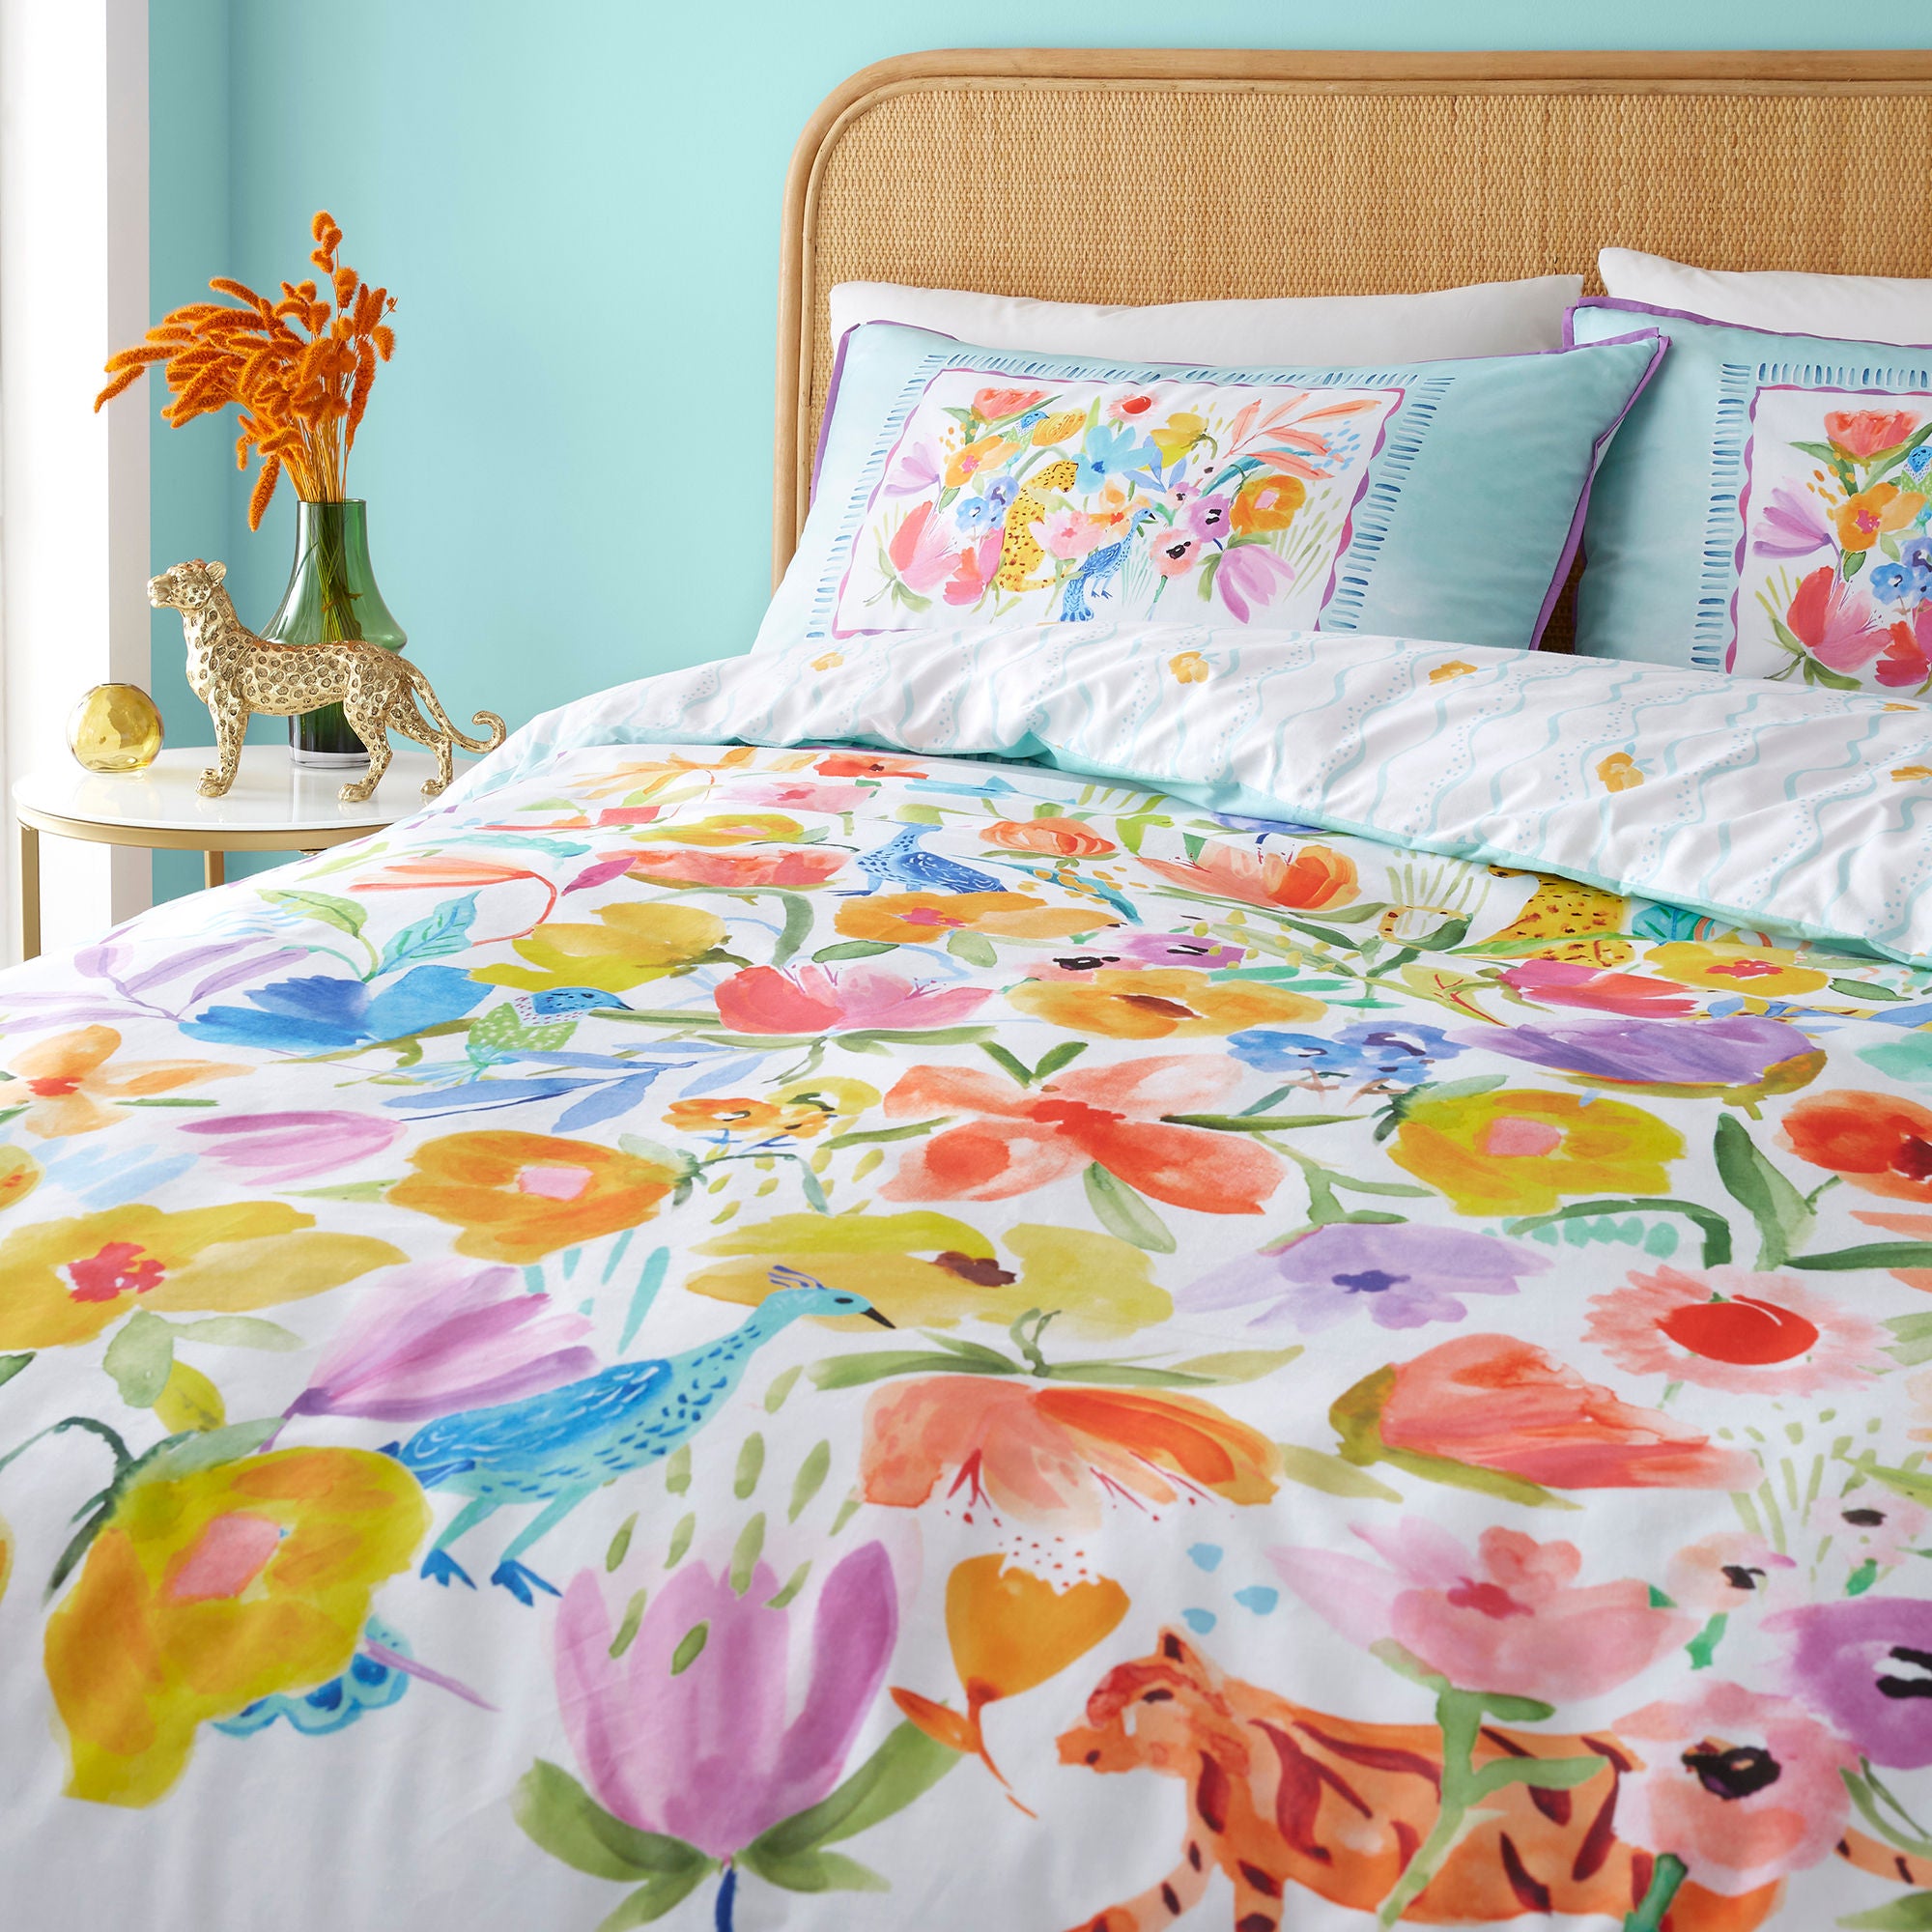 Festival Duvet Cover Set by Appletree Style in Duck Egg - Duvet Cover Set - Appletree Style